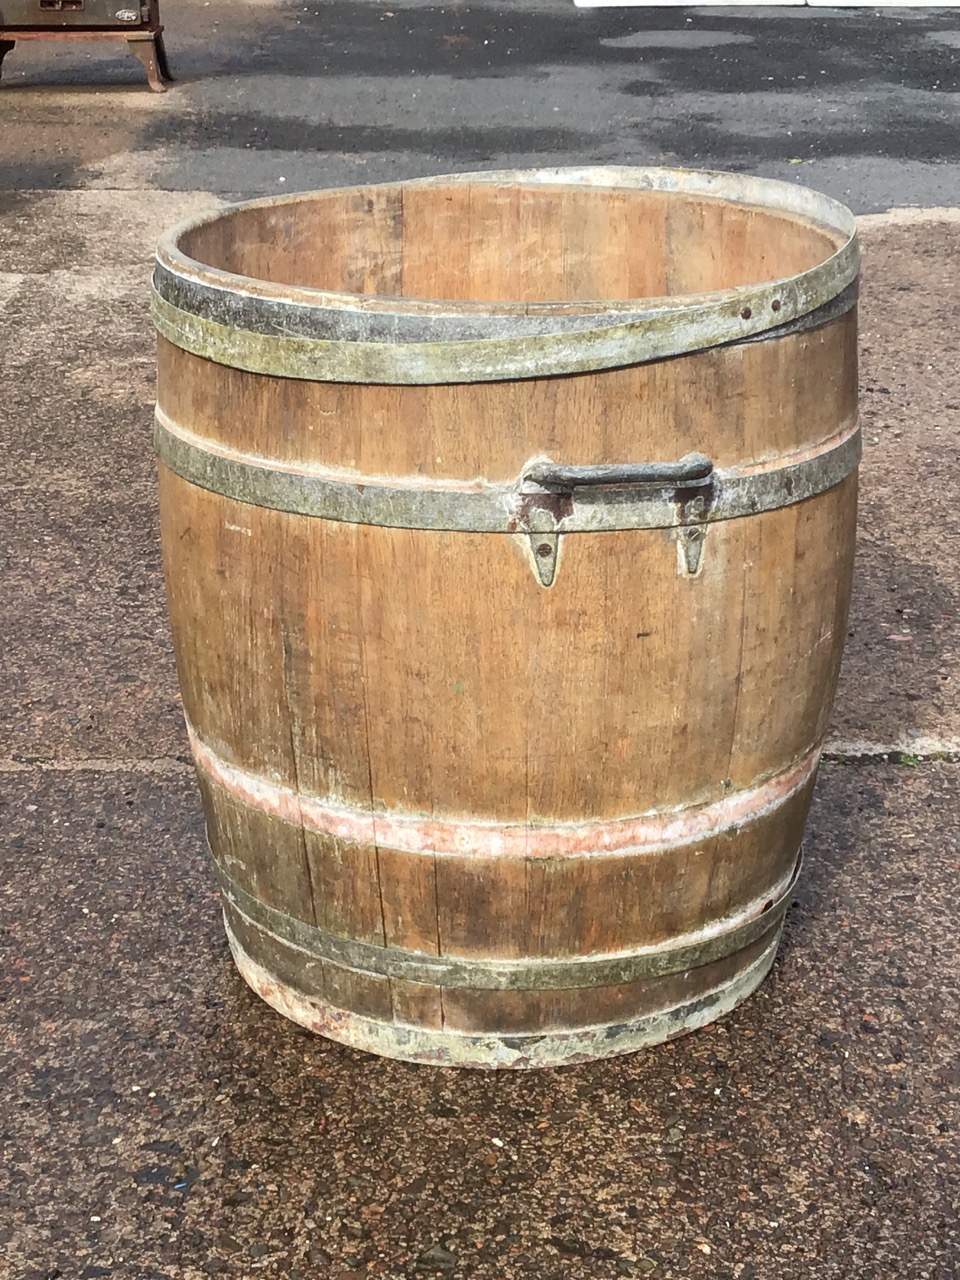 A coopered oak log barrel with iron hoops and carrying handles. (21in x 22in) - Image 2 of 3